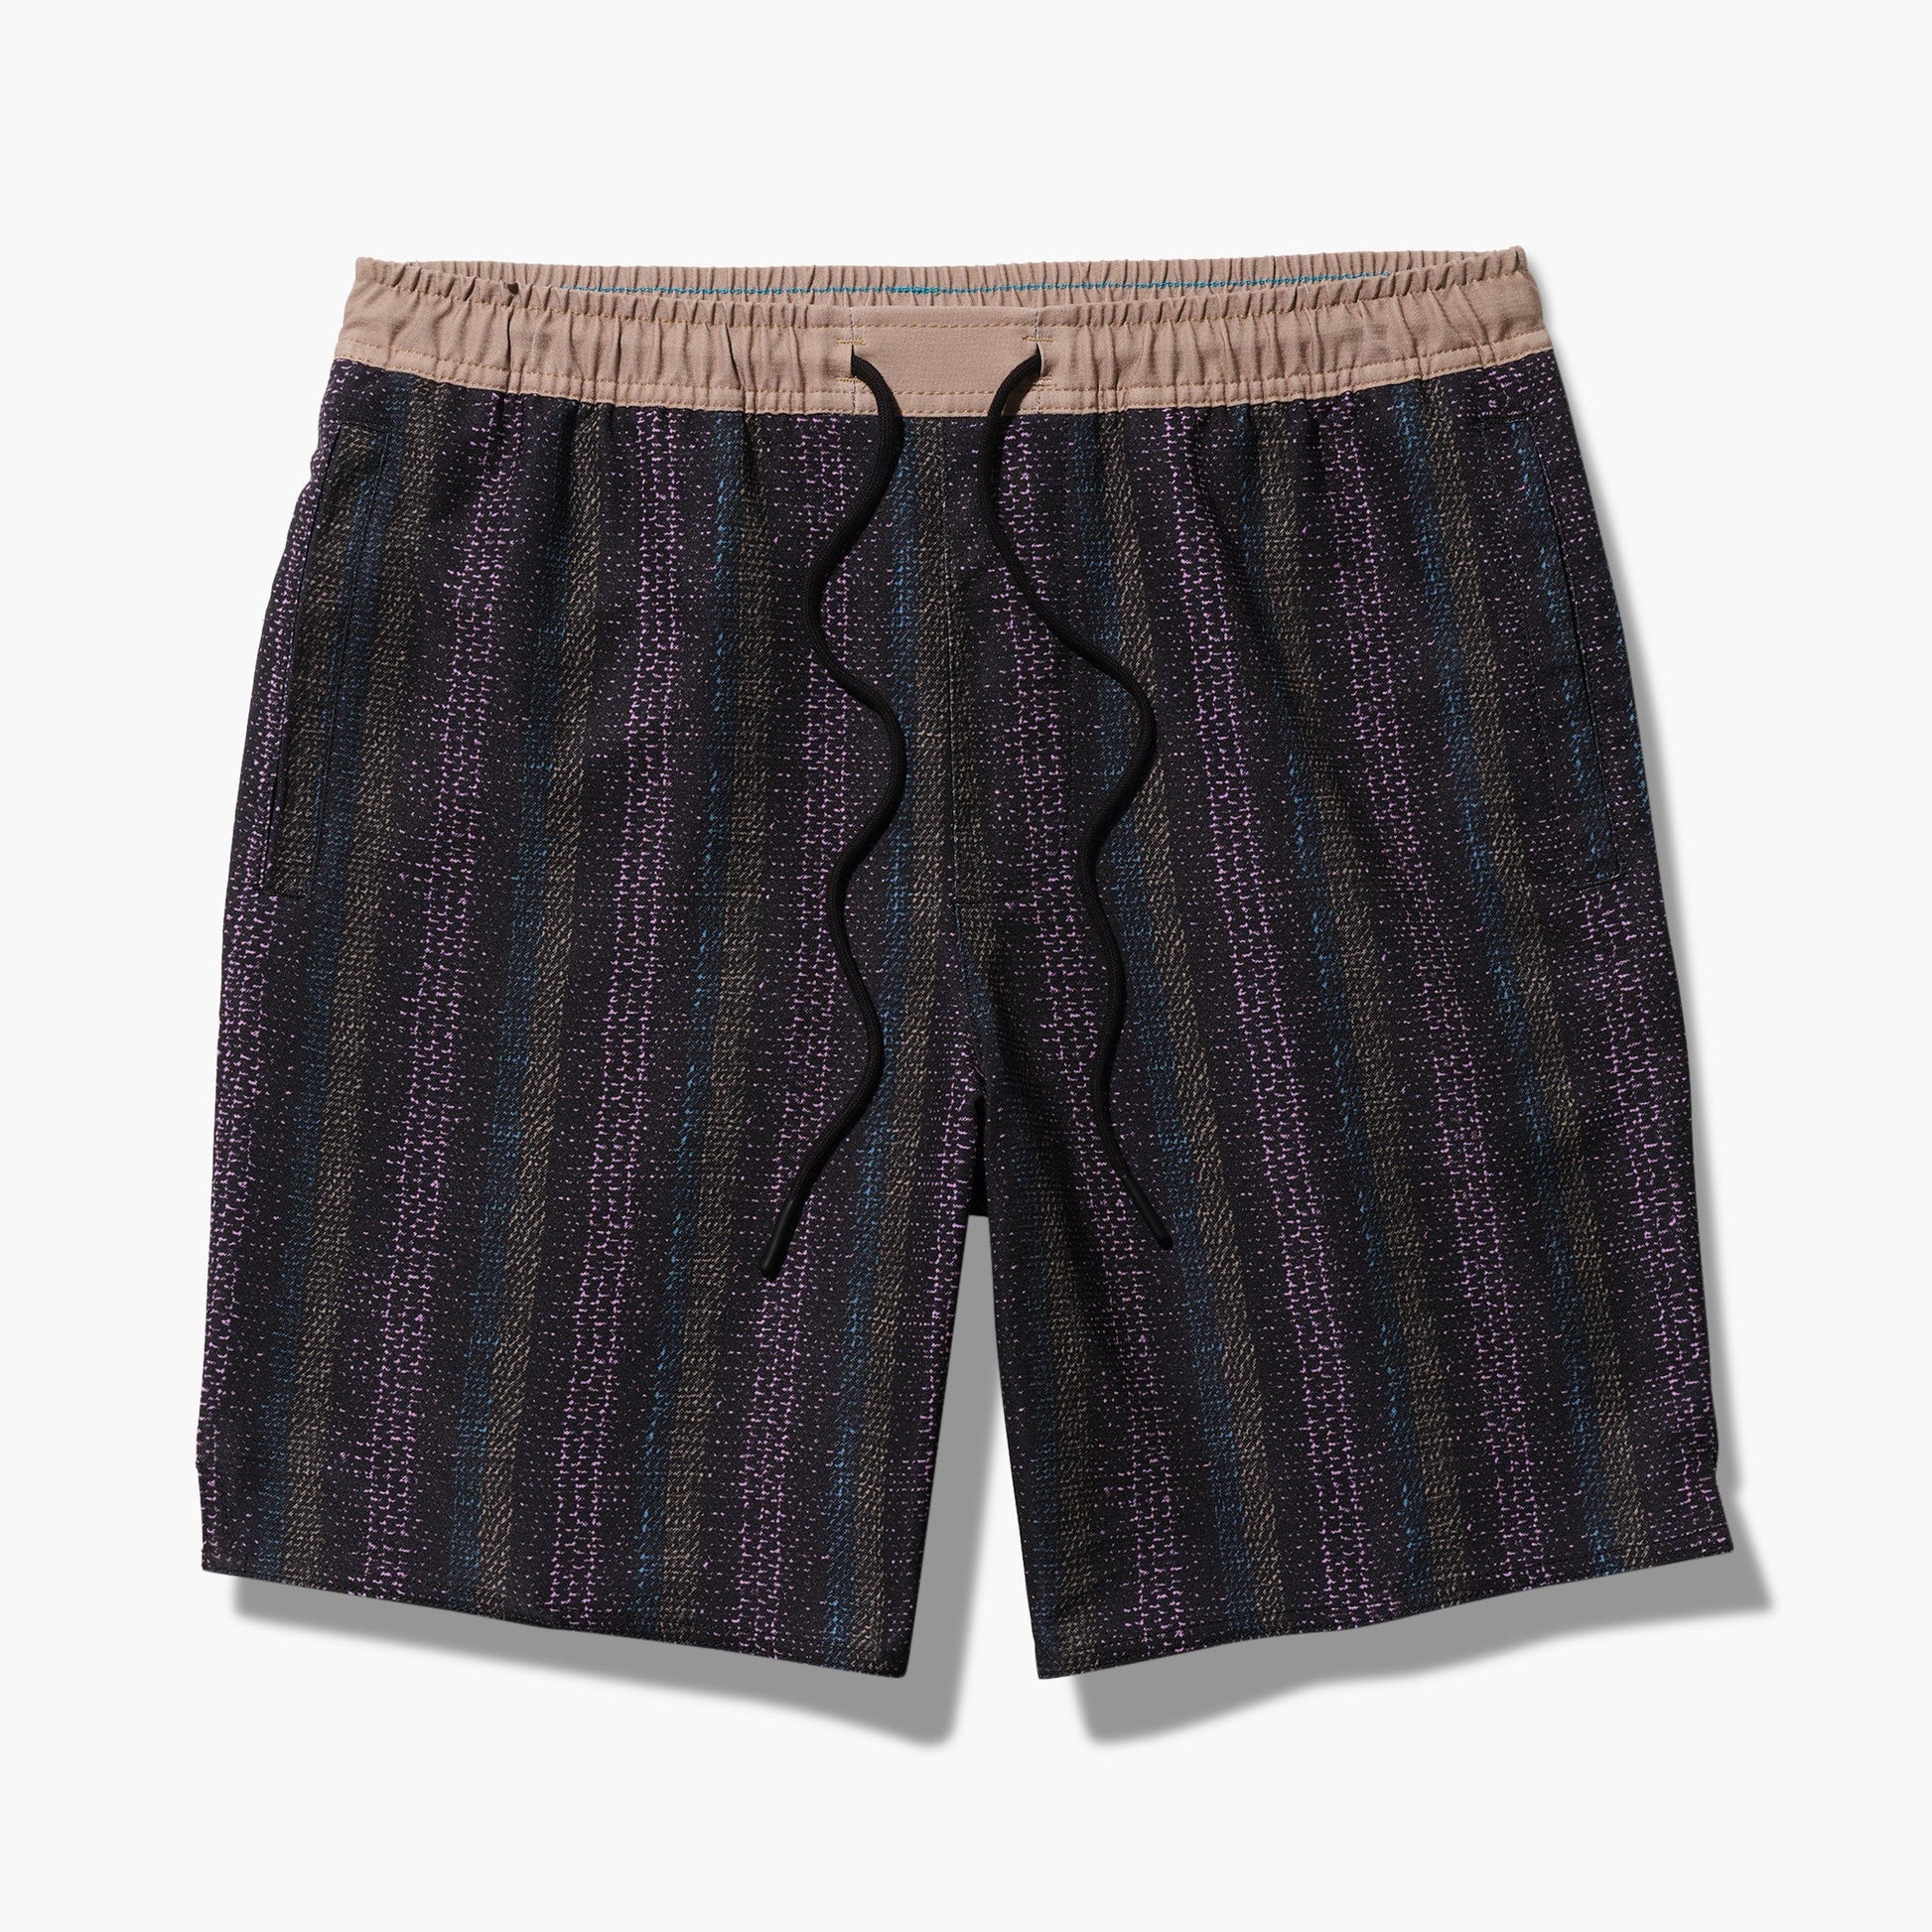 Stance Complex Athletic Short 7" Black Fade